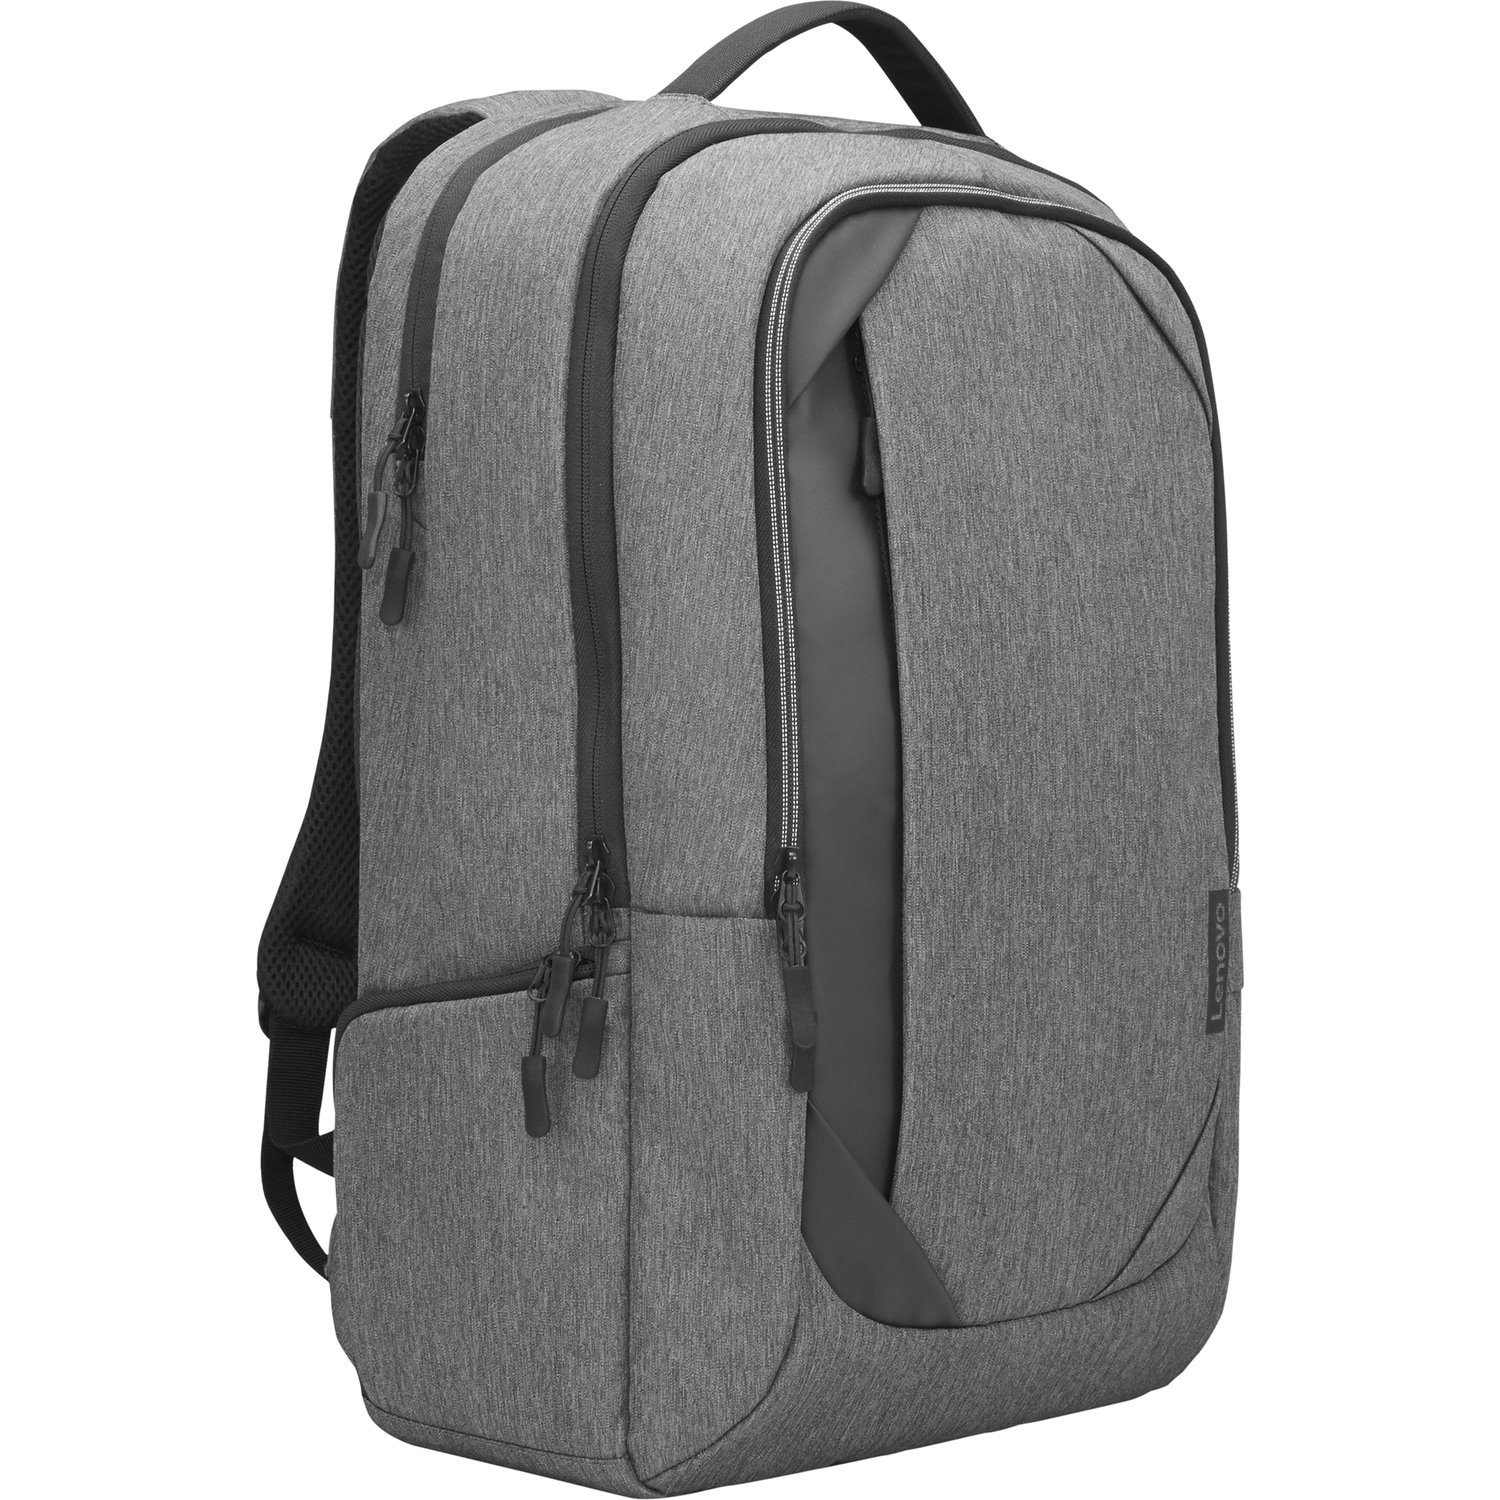 Lenovo Carrying Case (Backpack) for 43.2 cm (17") Notebook - Charcoal Grey